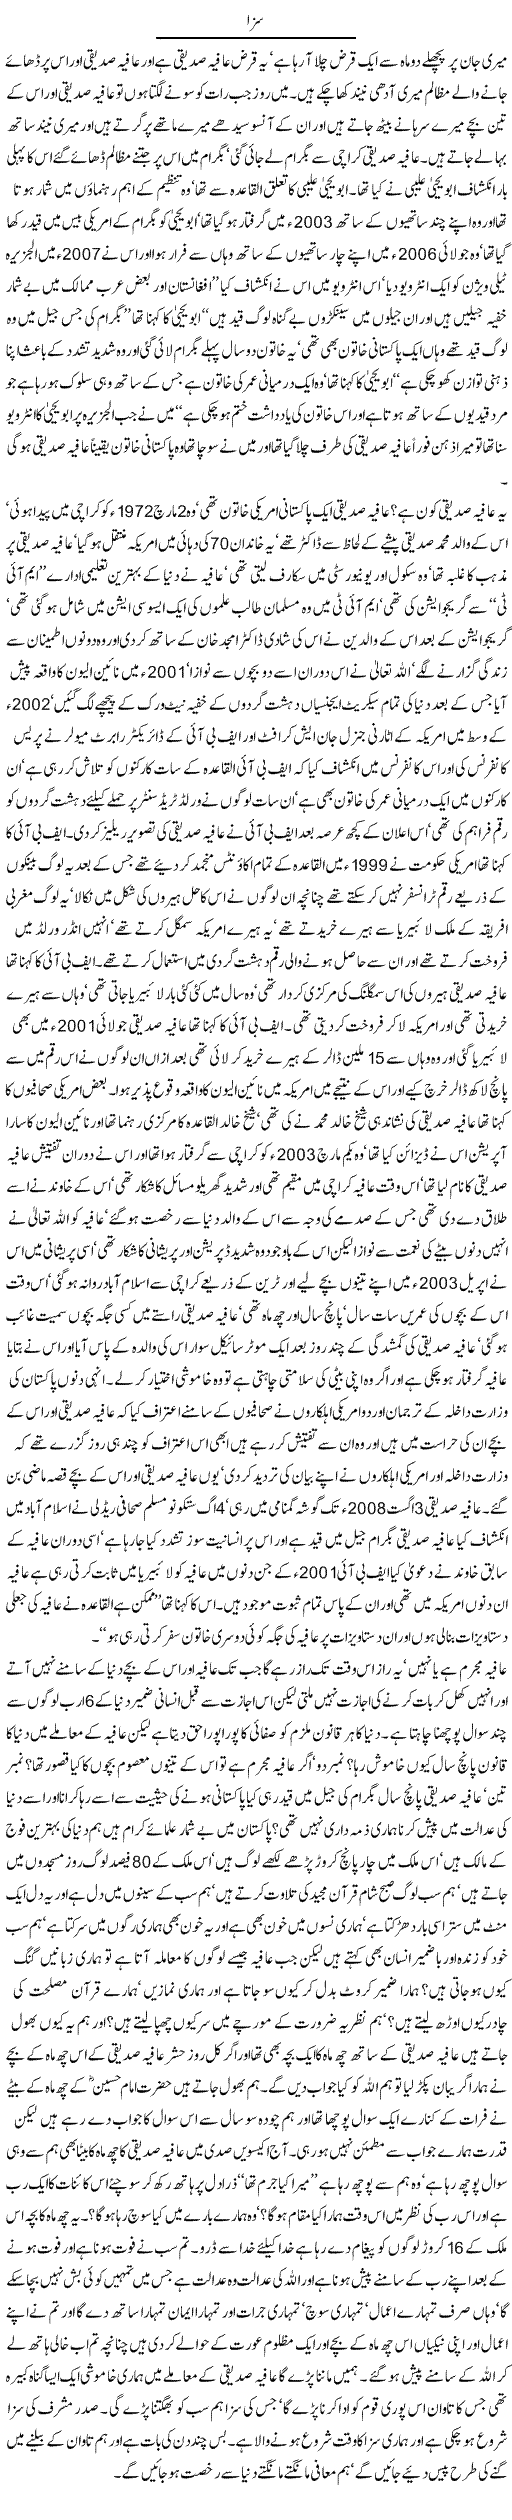 Sazaa by Javed Chaudhry 12 august 2008